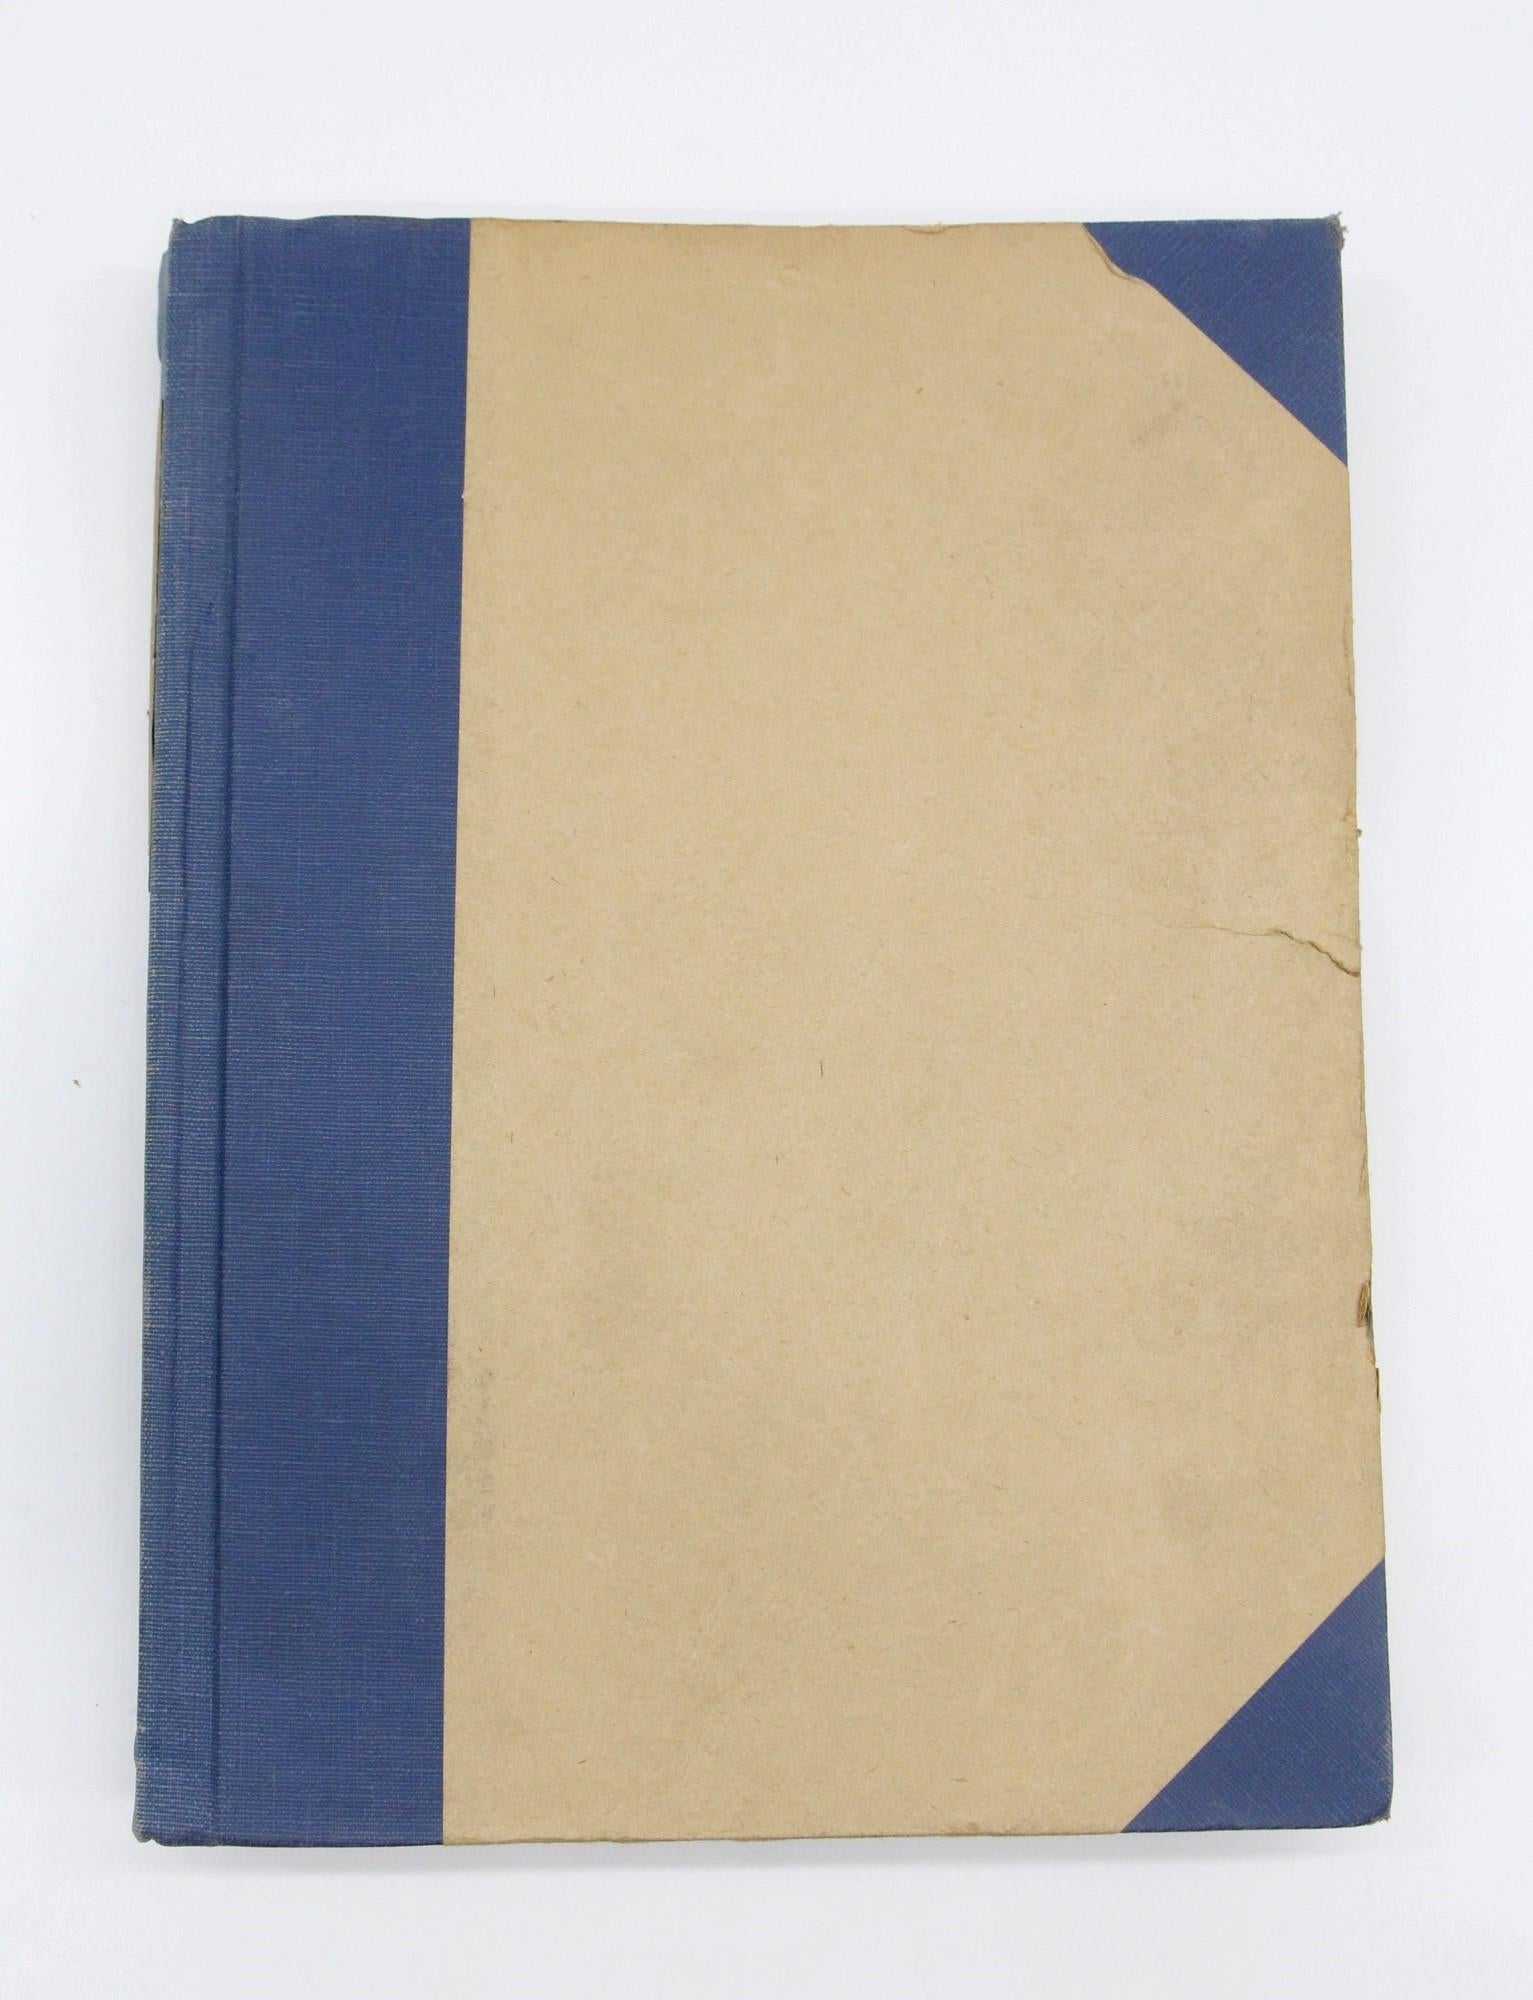 New York Daily News volume book with a tan and blue cover. Collection of bound newspapers from April, 1944. Features WWII news photos as well as photos of pop culture and celebrities.